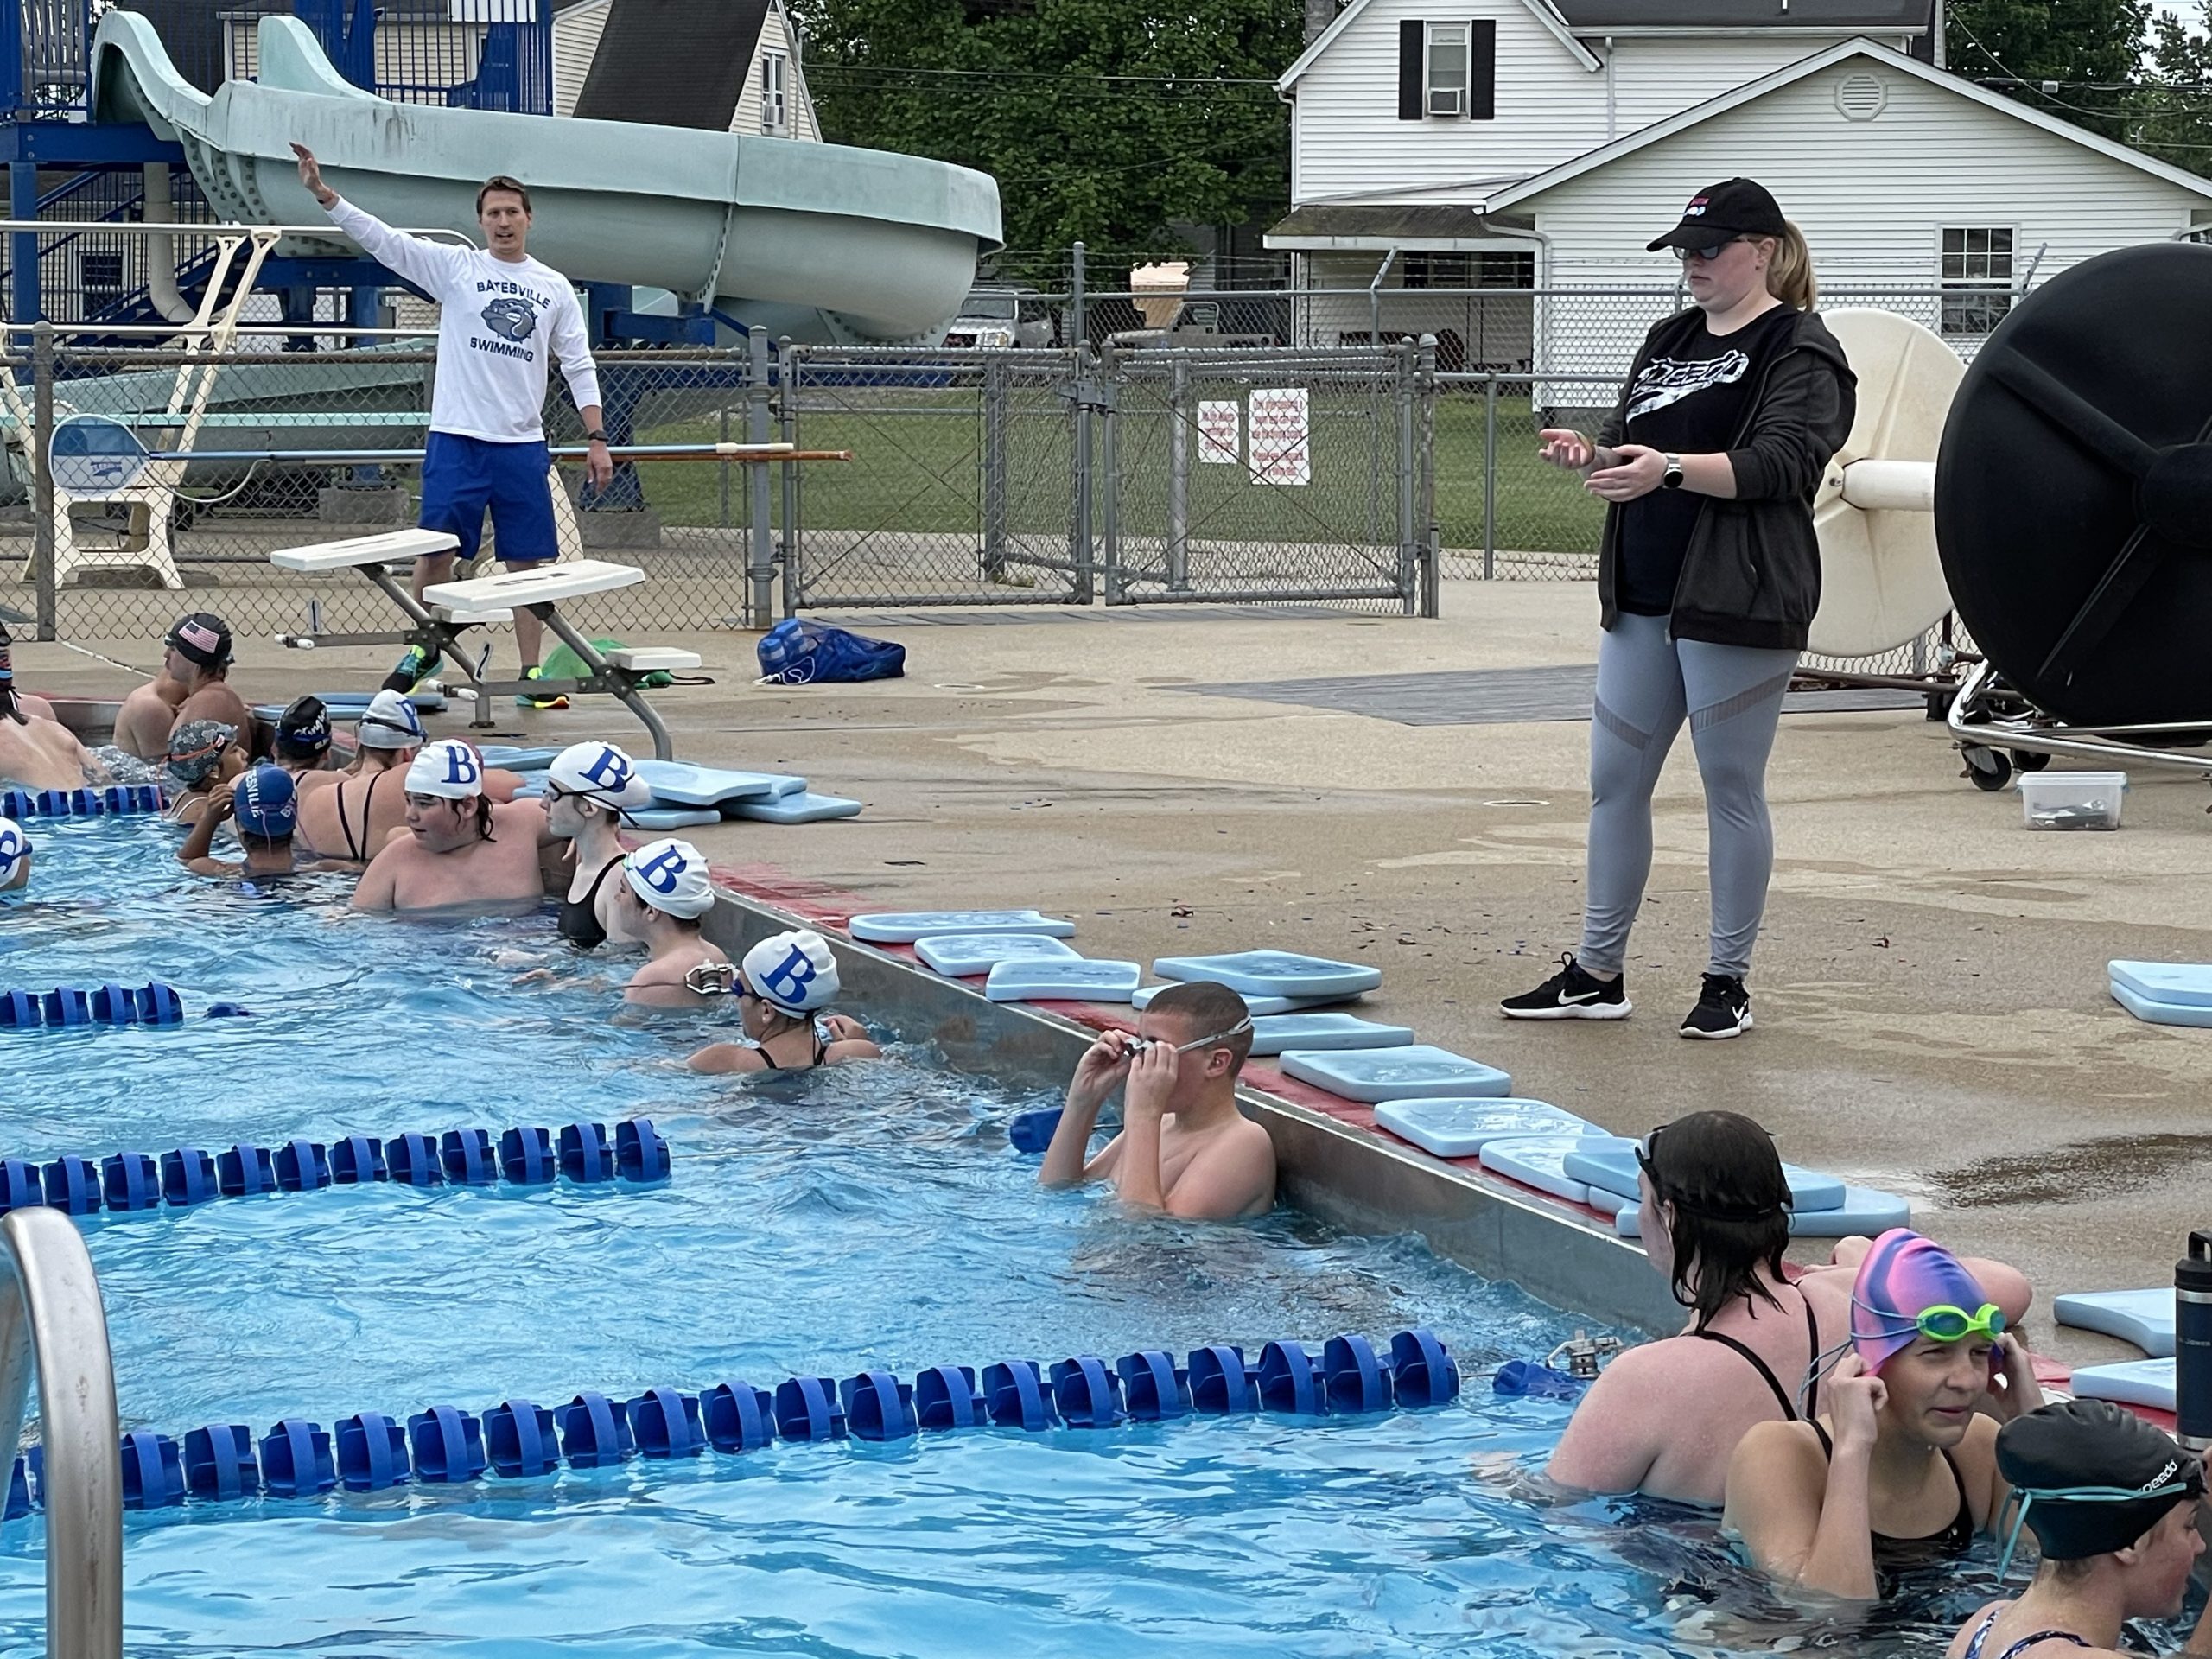 Swimmers listening to a coach give instruction